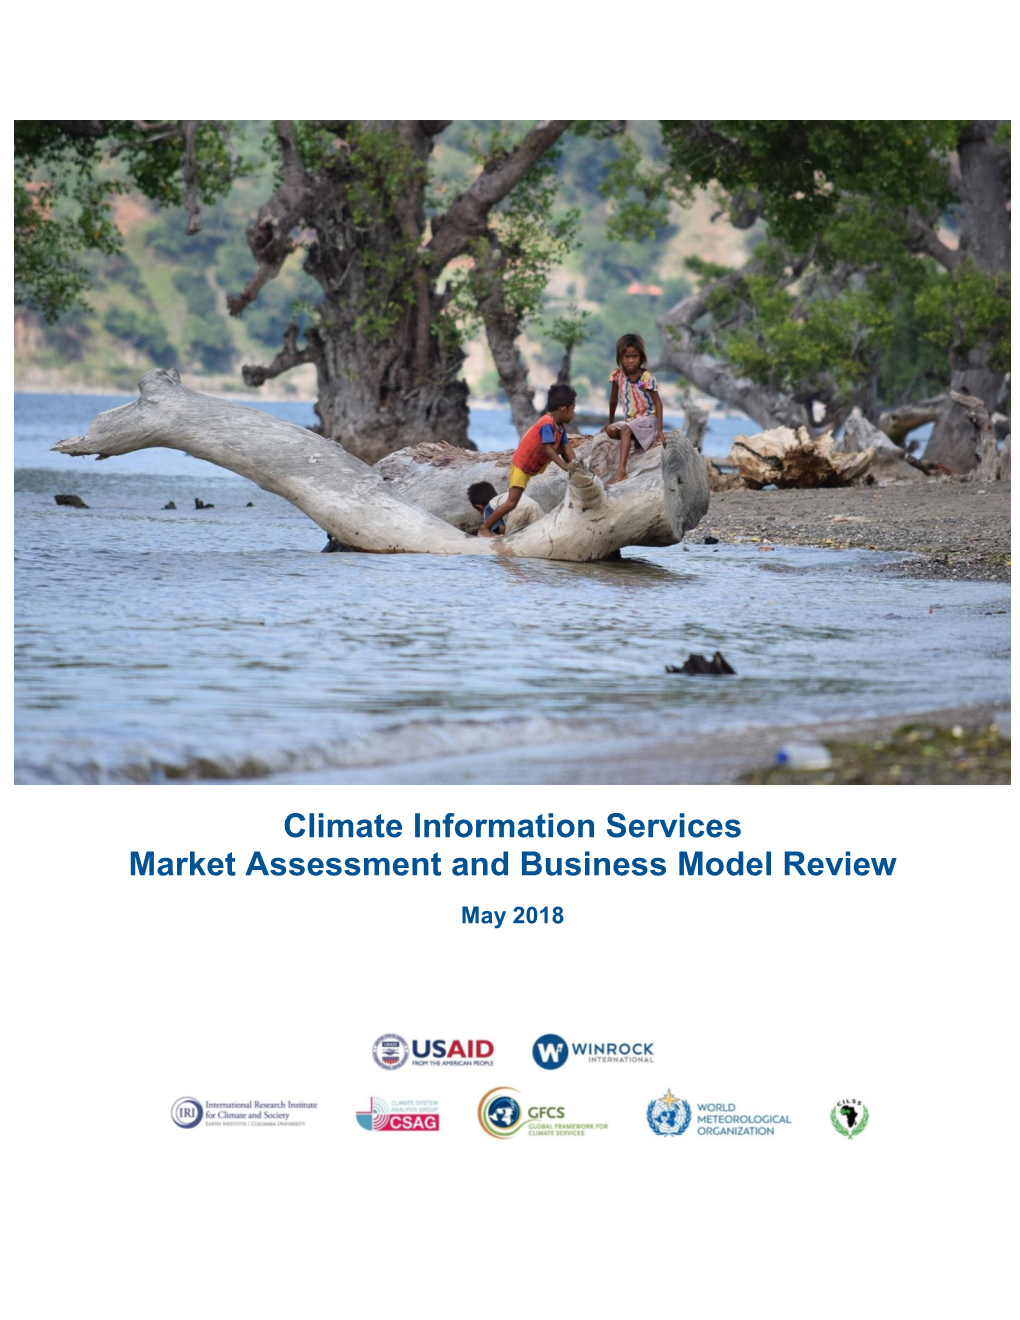 Climate Information Services Market Assessment and Business Model Review